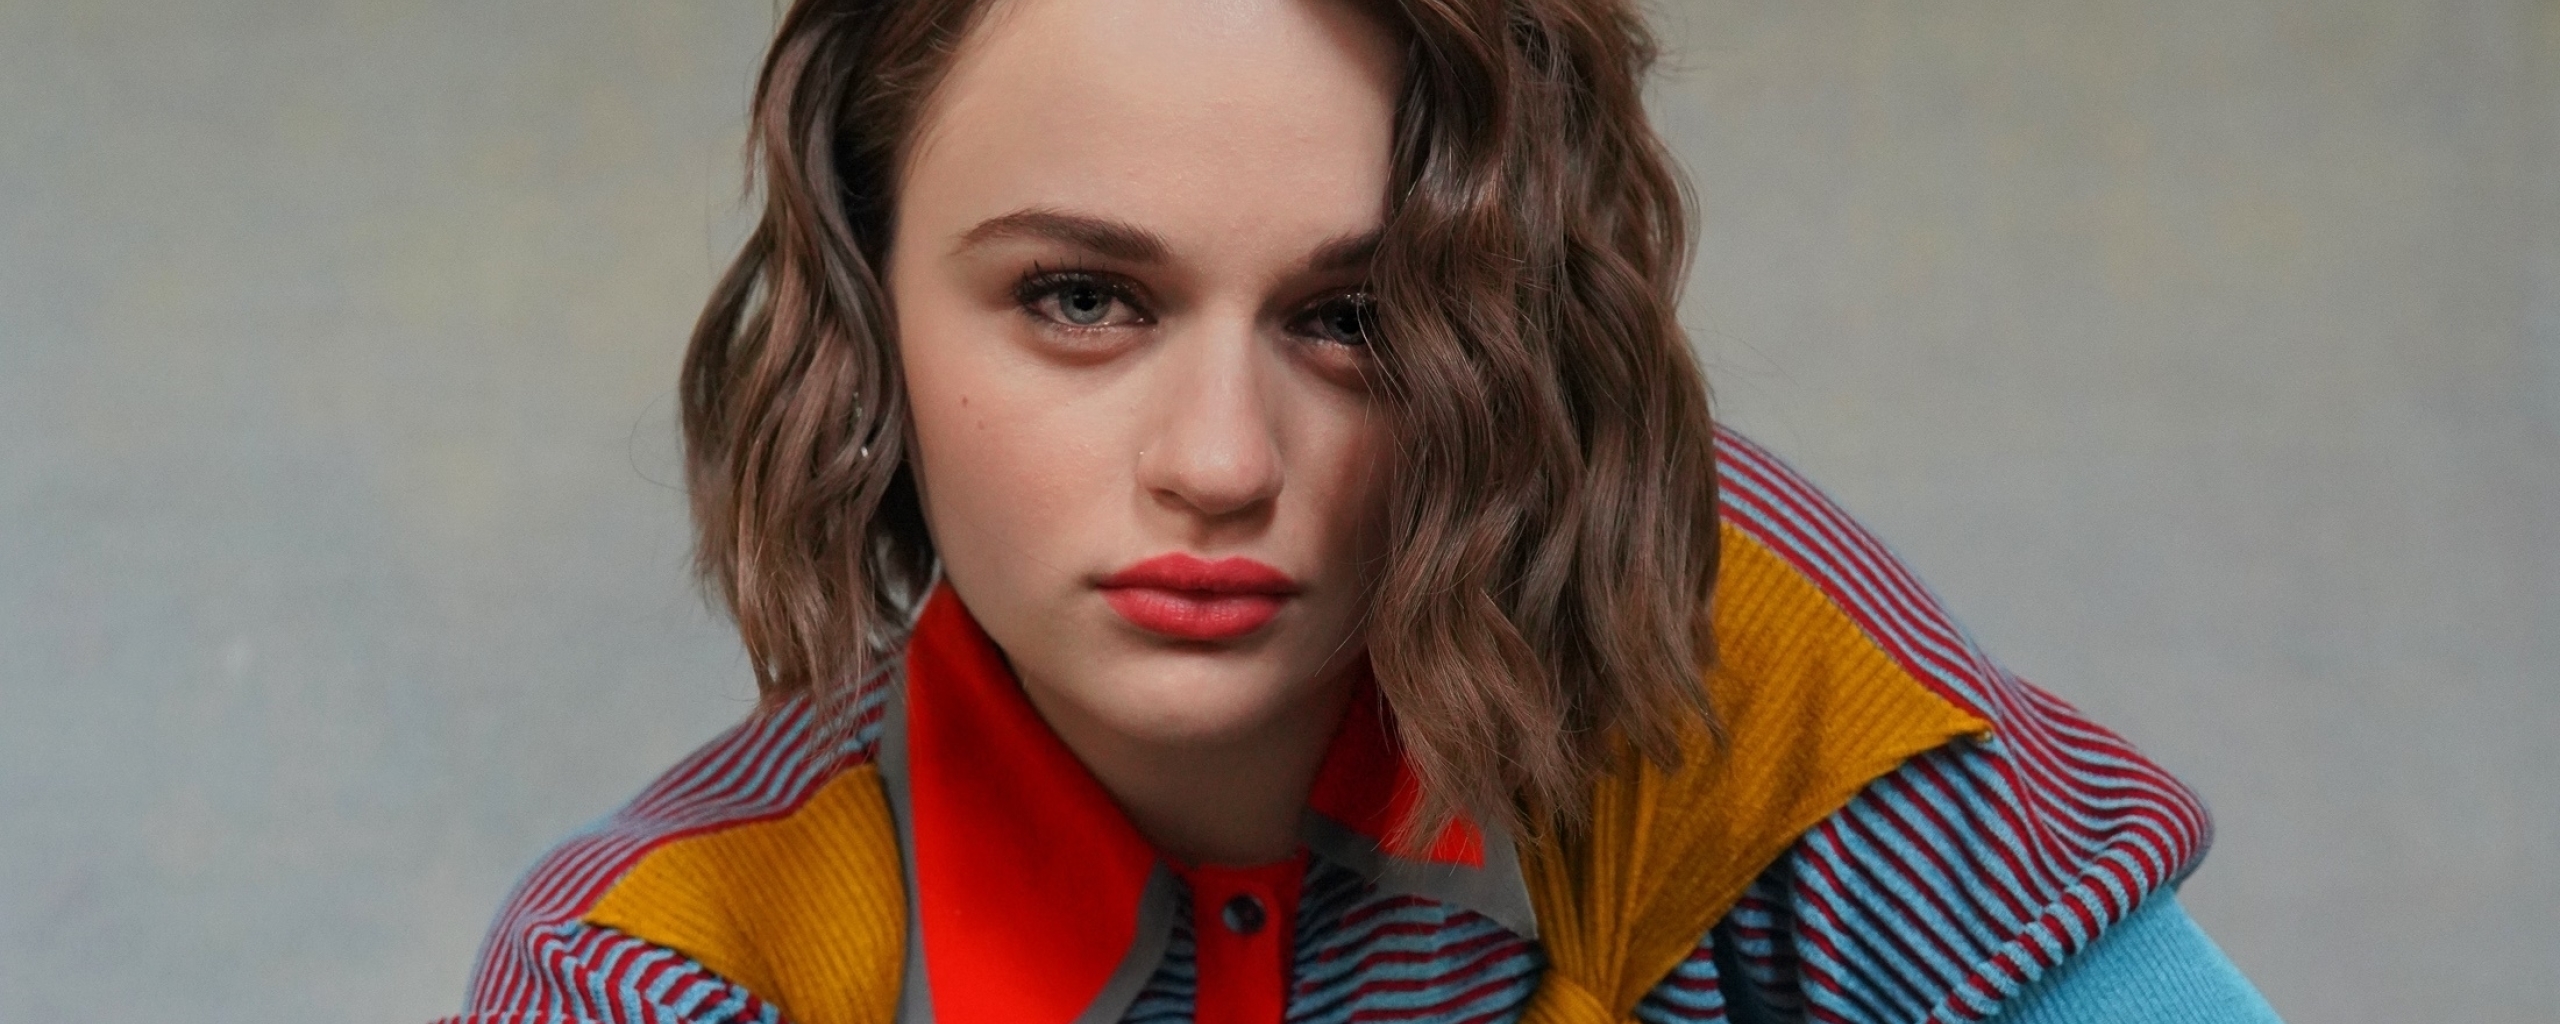 2560x1024 Resolution Actress Joey King 2020 Modeling 2560x1024 ...